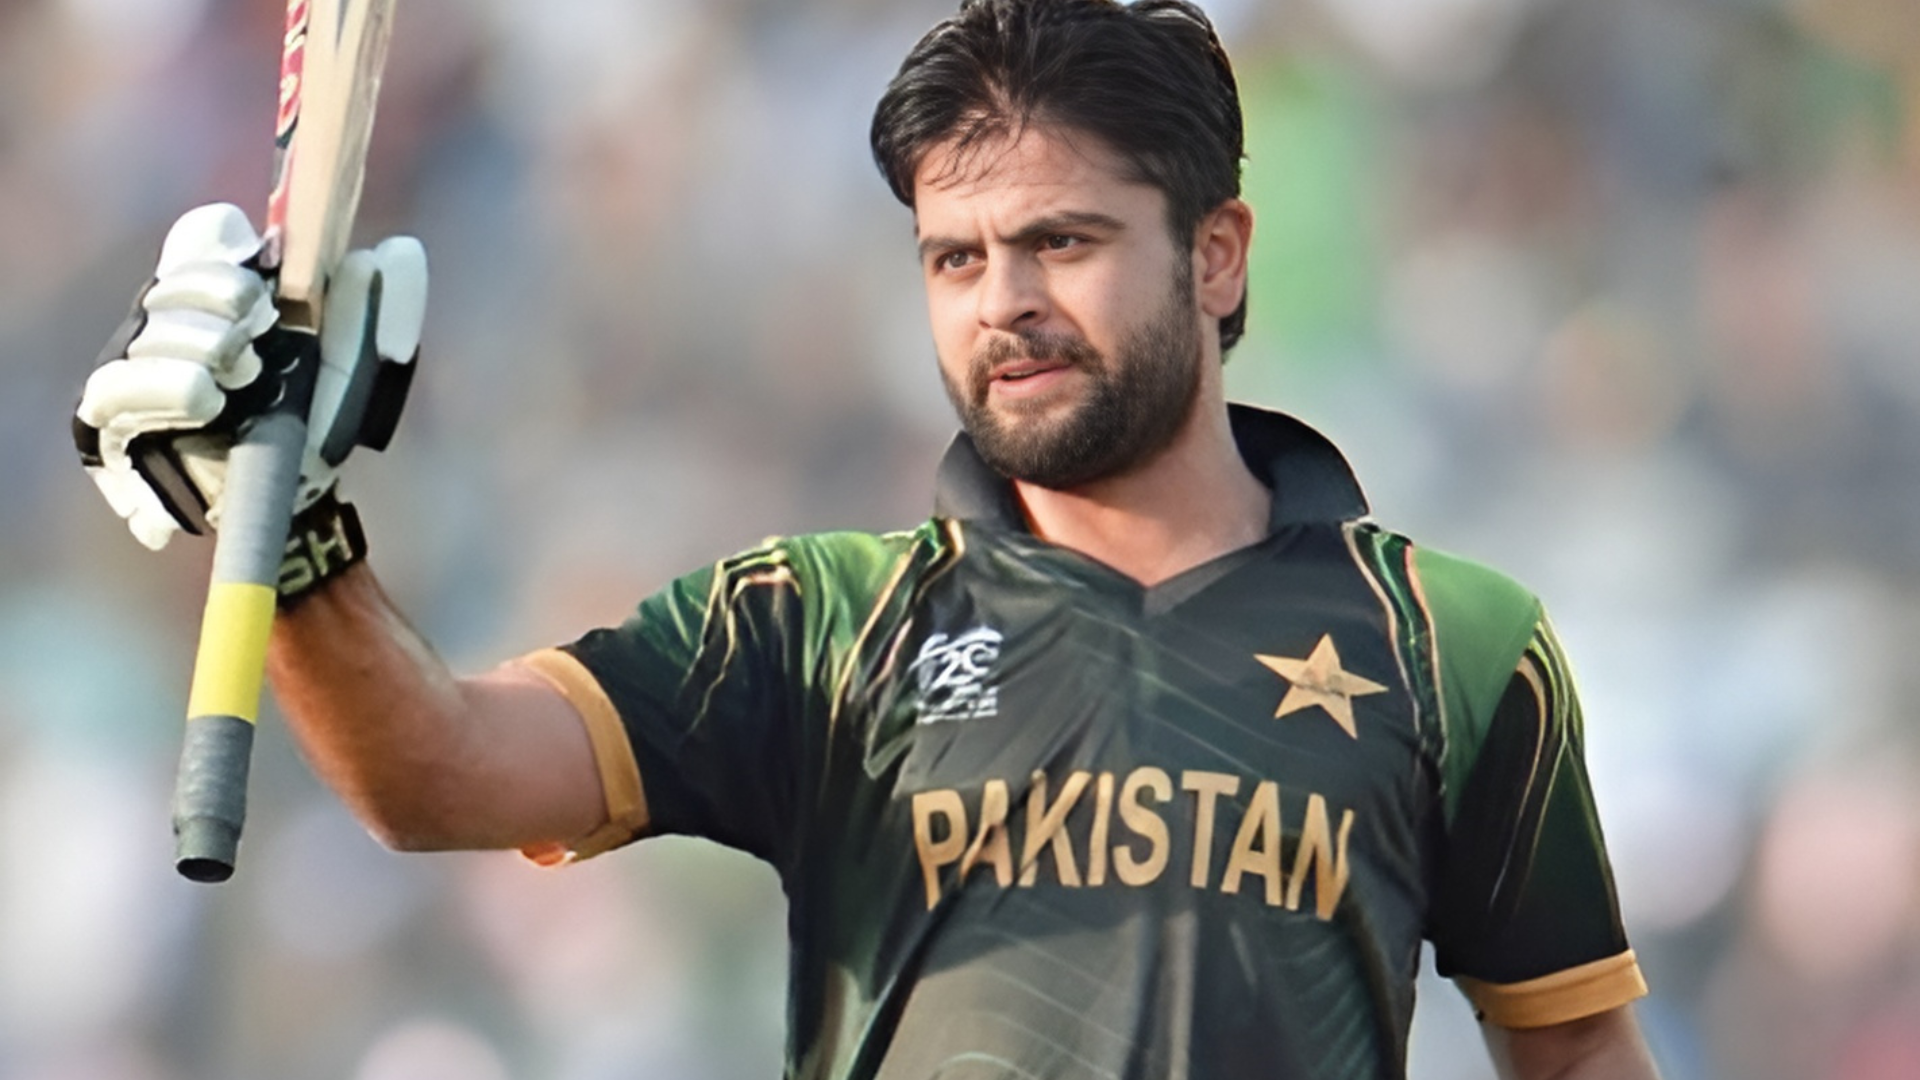 Watch: Ahmed Shehzad Bowled Out By Local Resident, Laughed Off With ‘He Wants To Play For Pakistan’